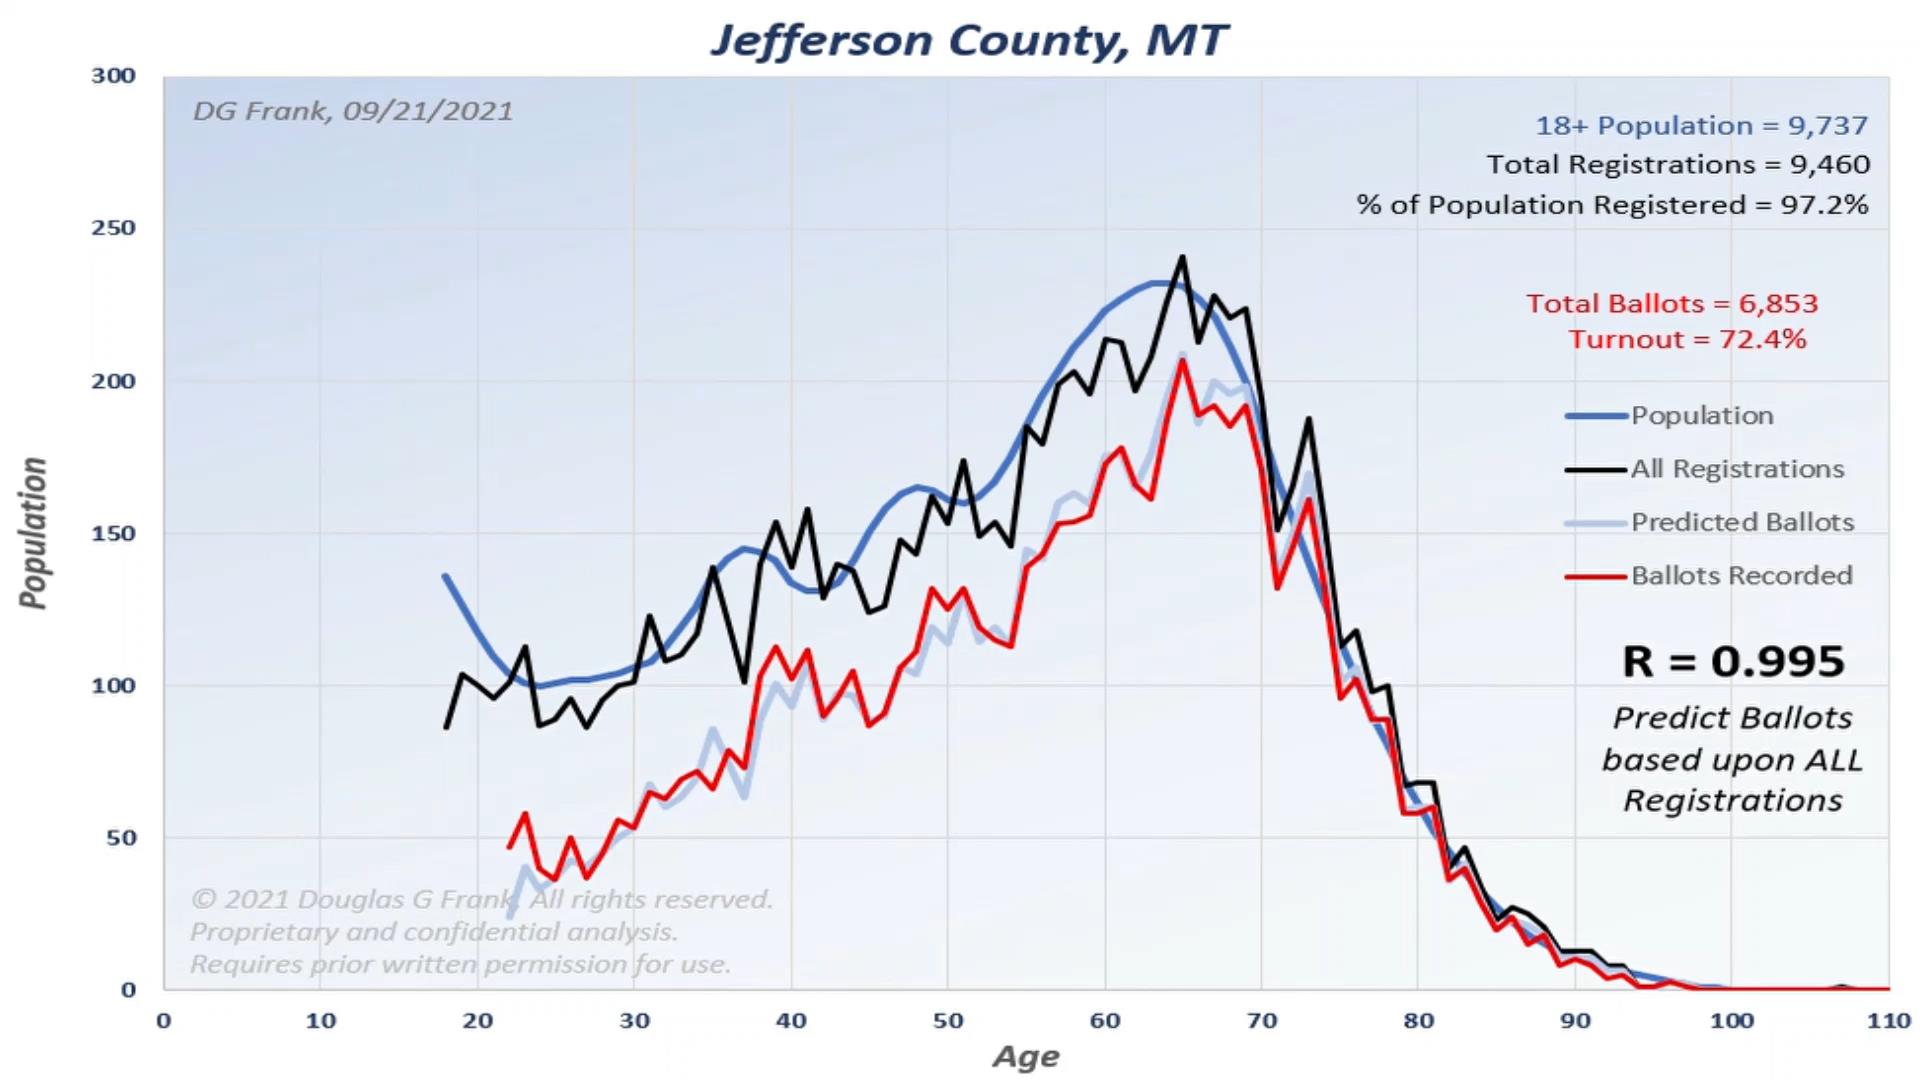 Jefferson County 2020 Election Analysis Chart by Dr. Doug Frank